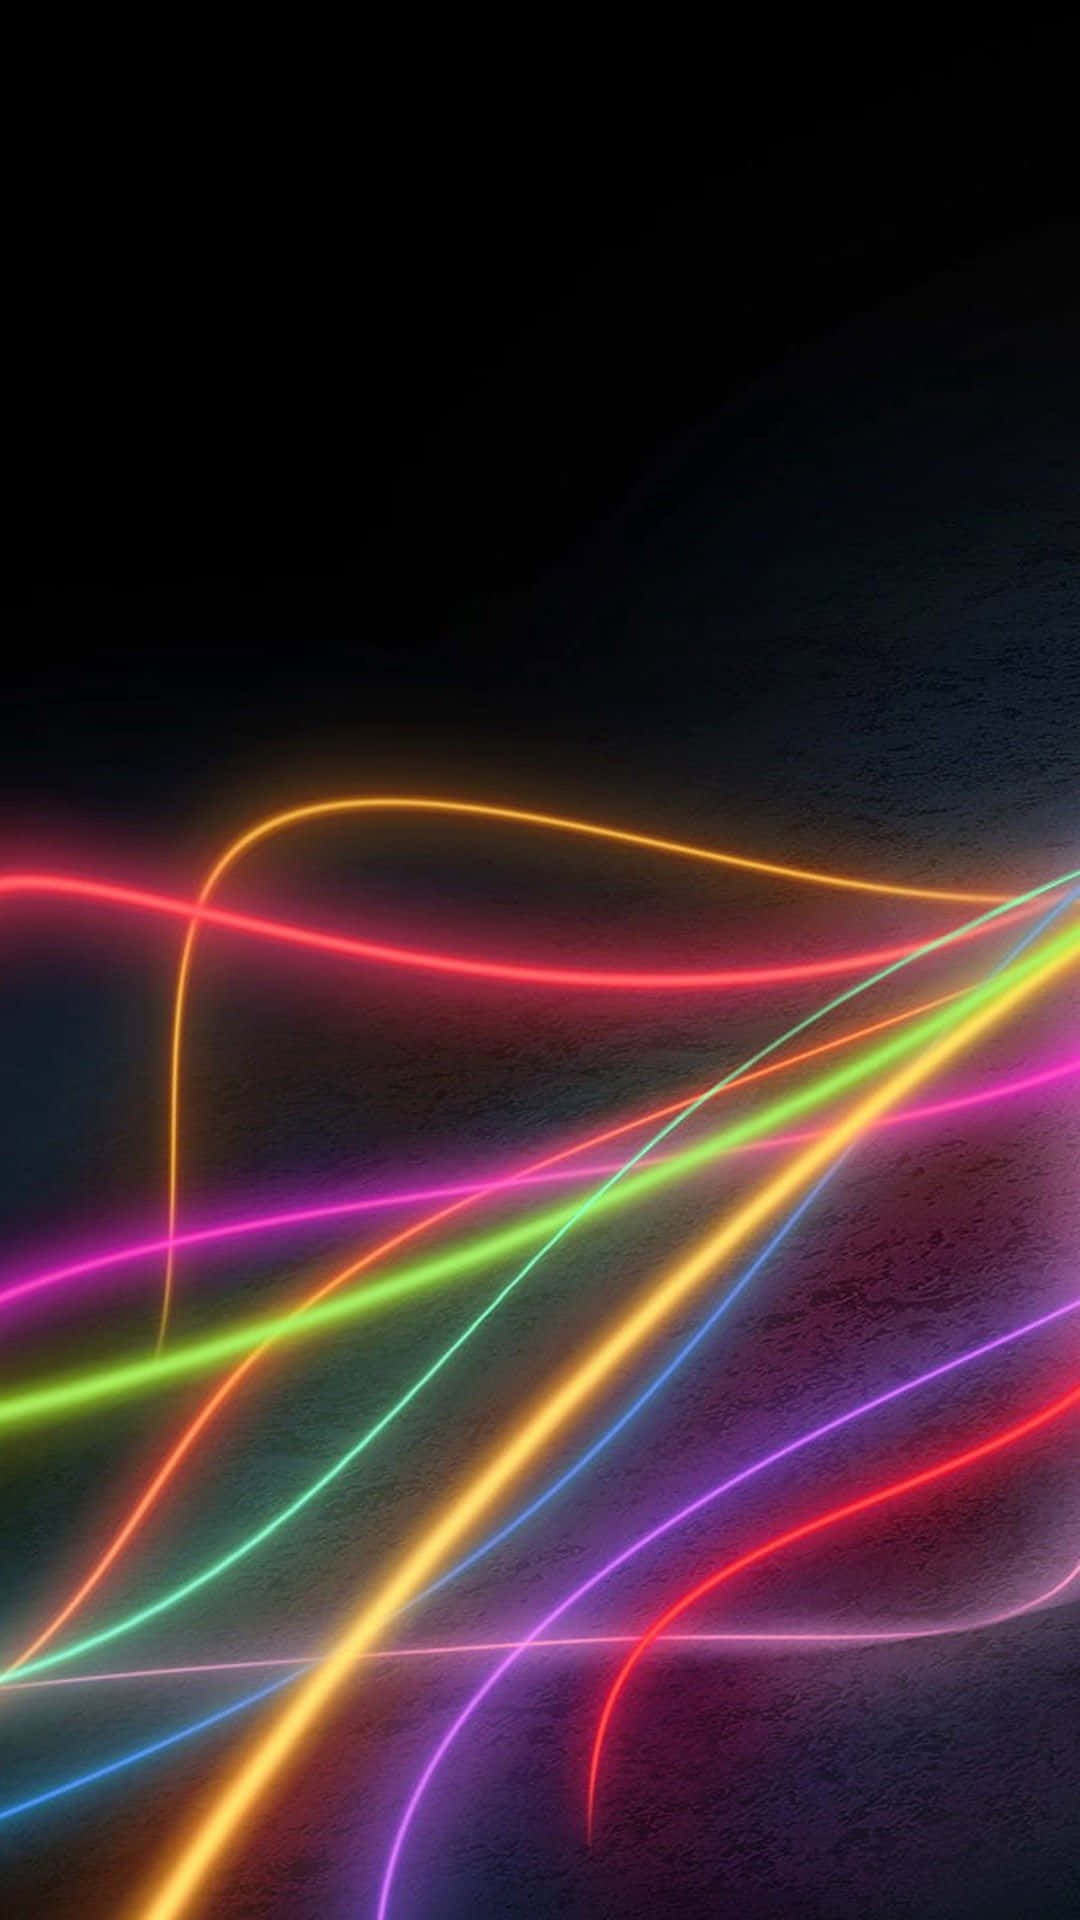 The Future of Smartphone Technology - Samsung Galaxy Note 10 Plus Wallpaper